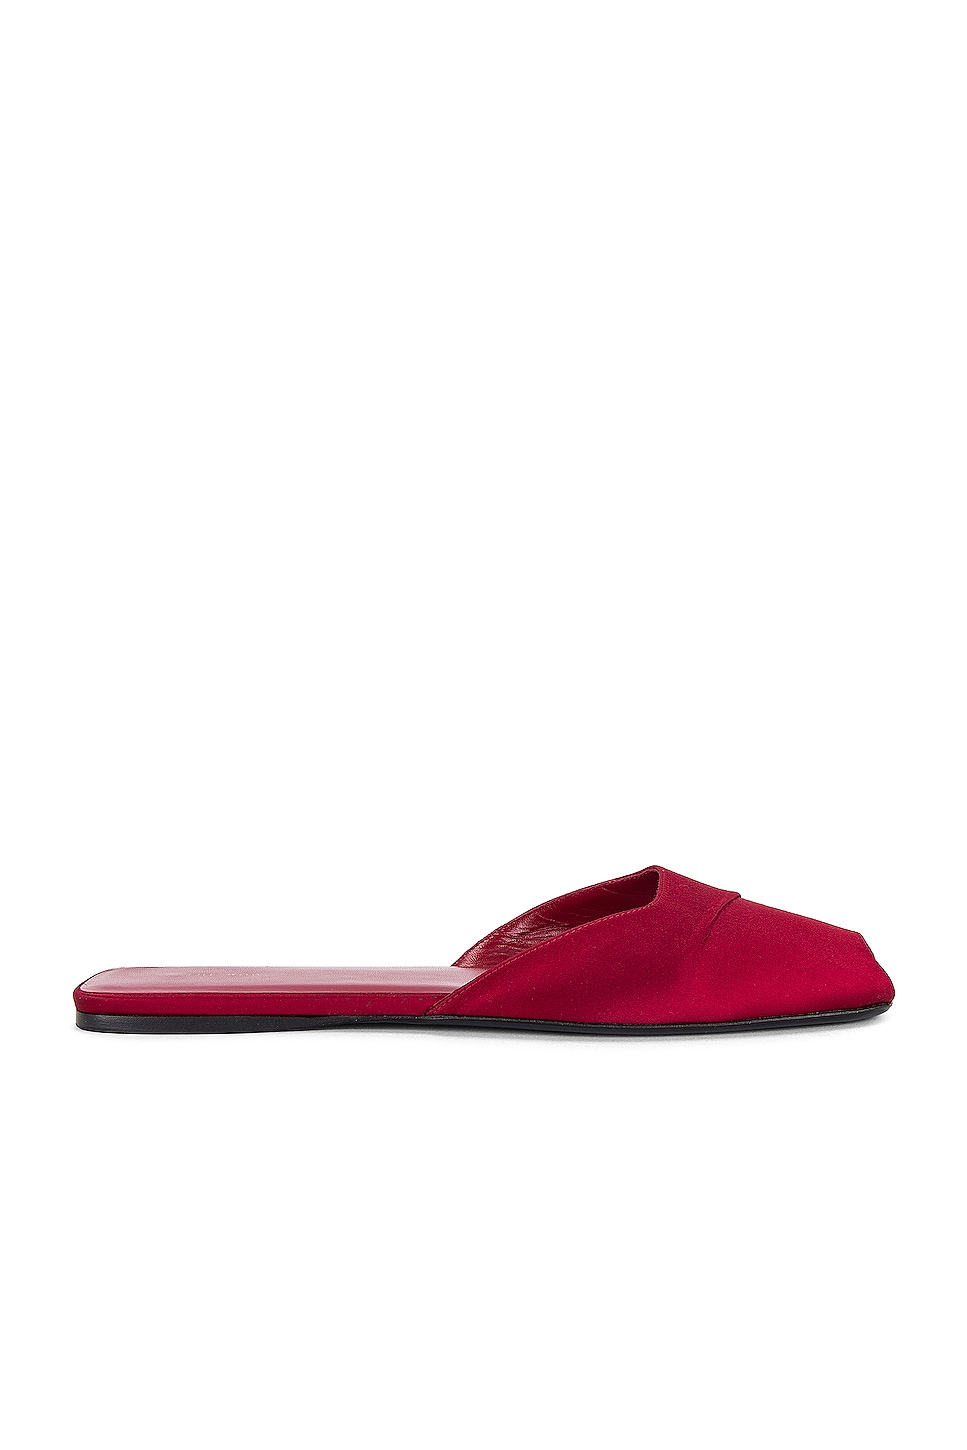 Image 1 of The Row Milla Flat in Red